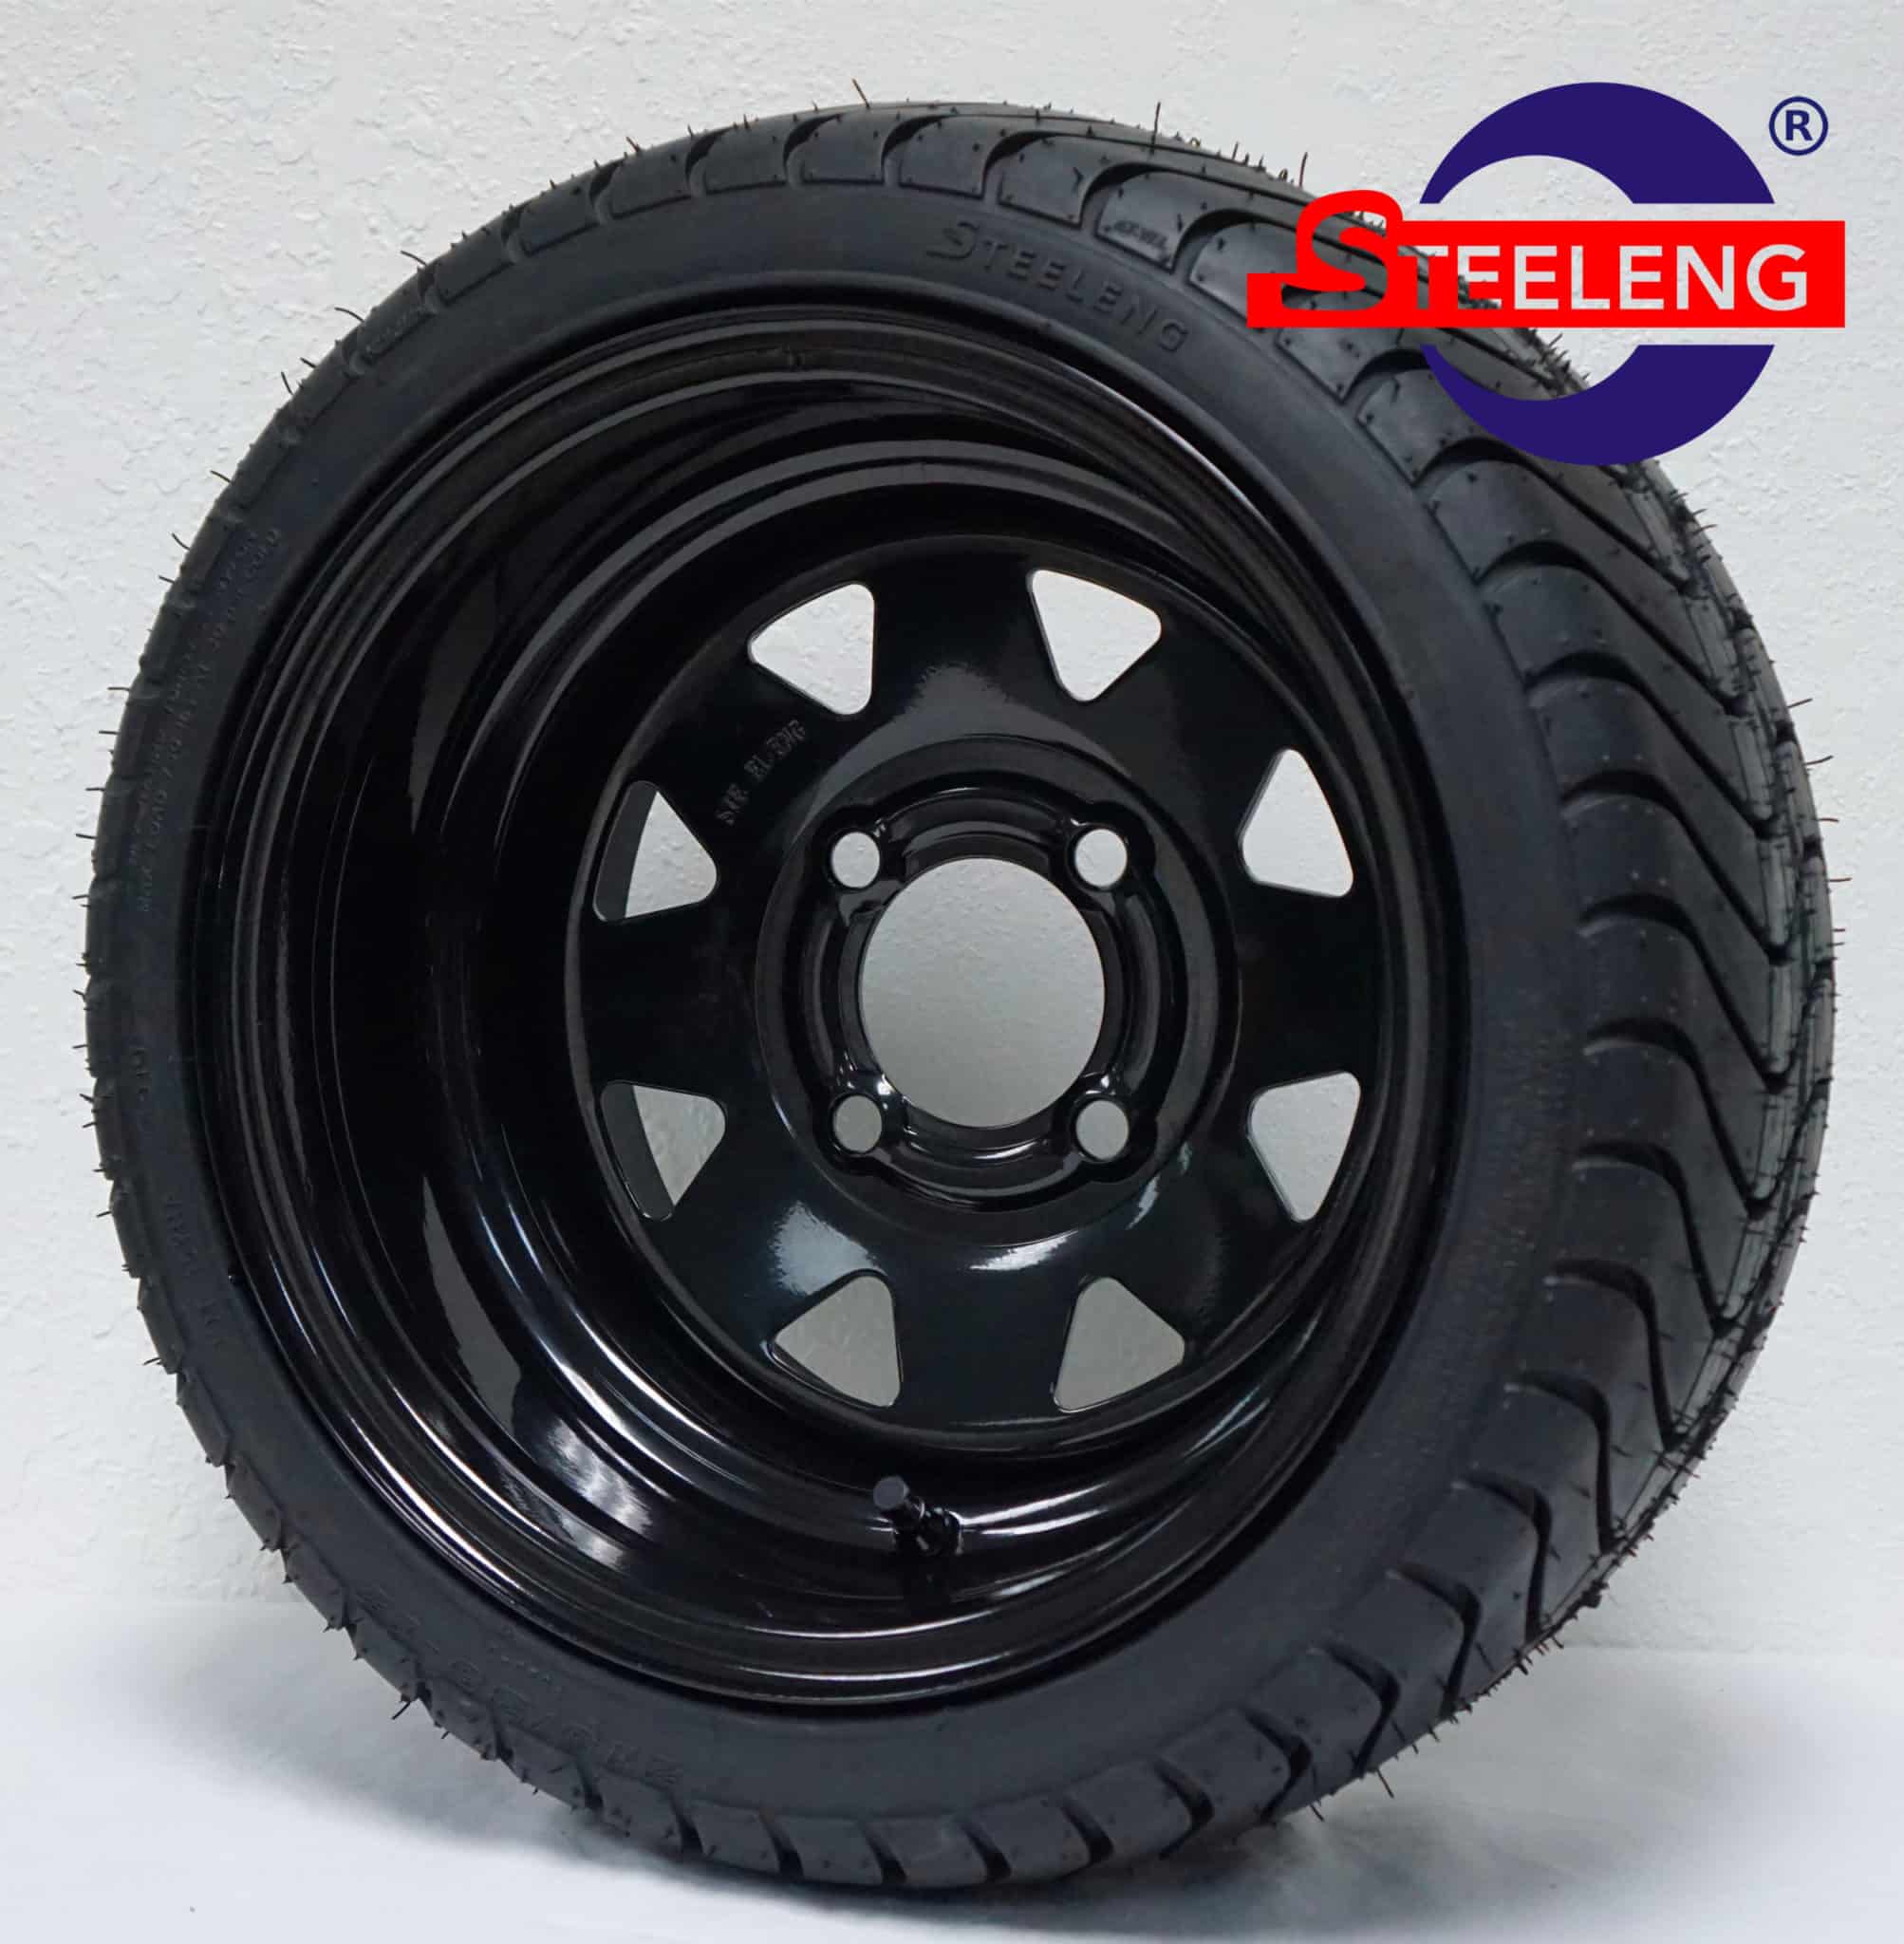 BNDL-SW1201-TR1212 12" x 7" Black Slotted Steel Wheel & 215/35-12 Low Profile Tire DOT Approved Set of 4